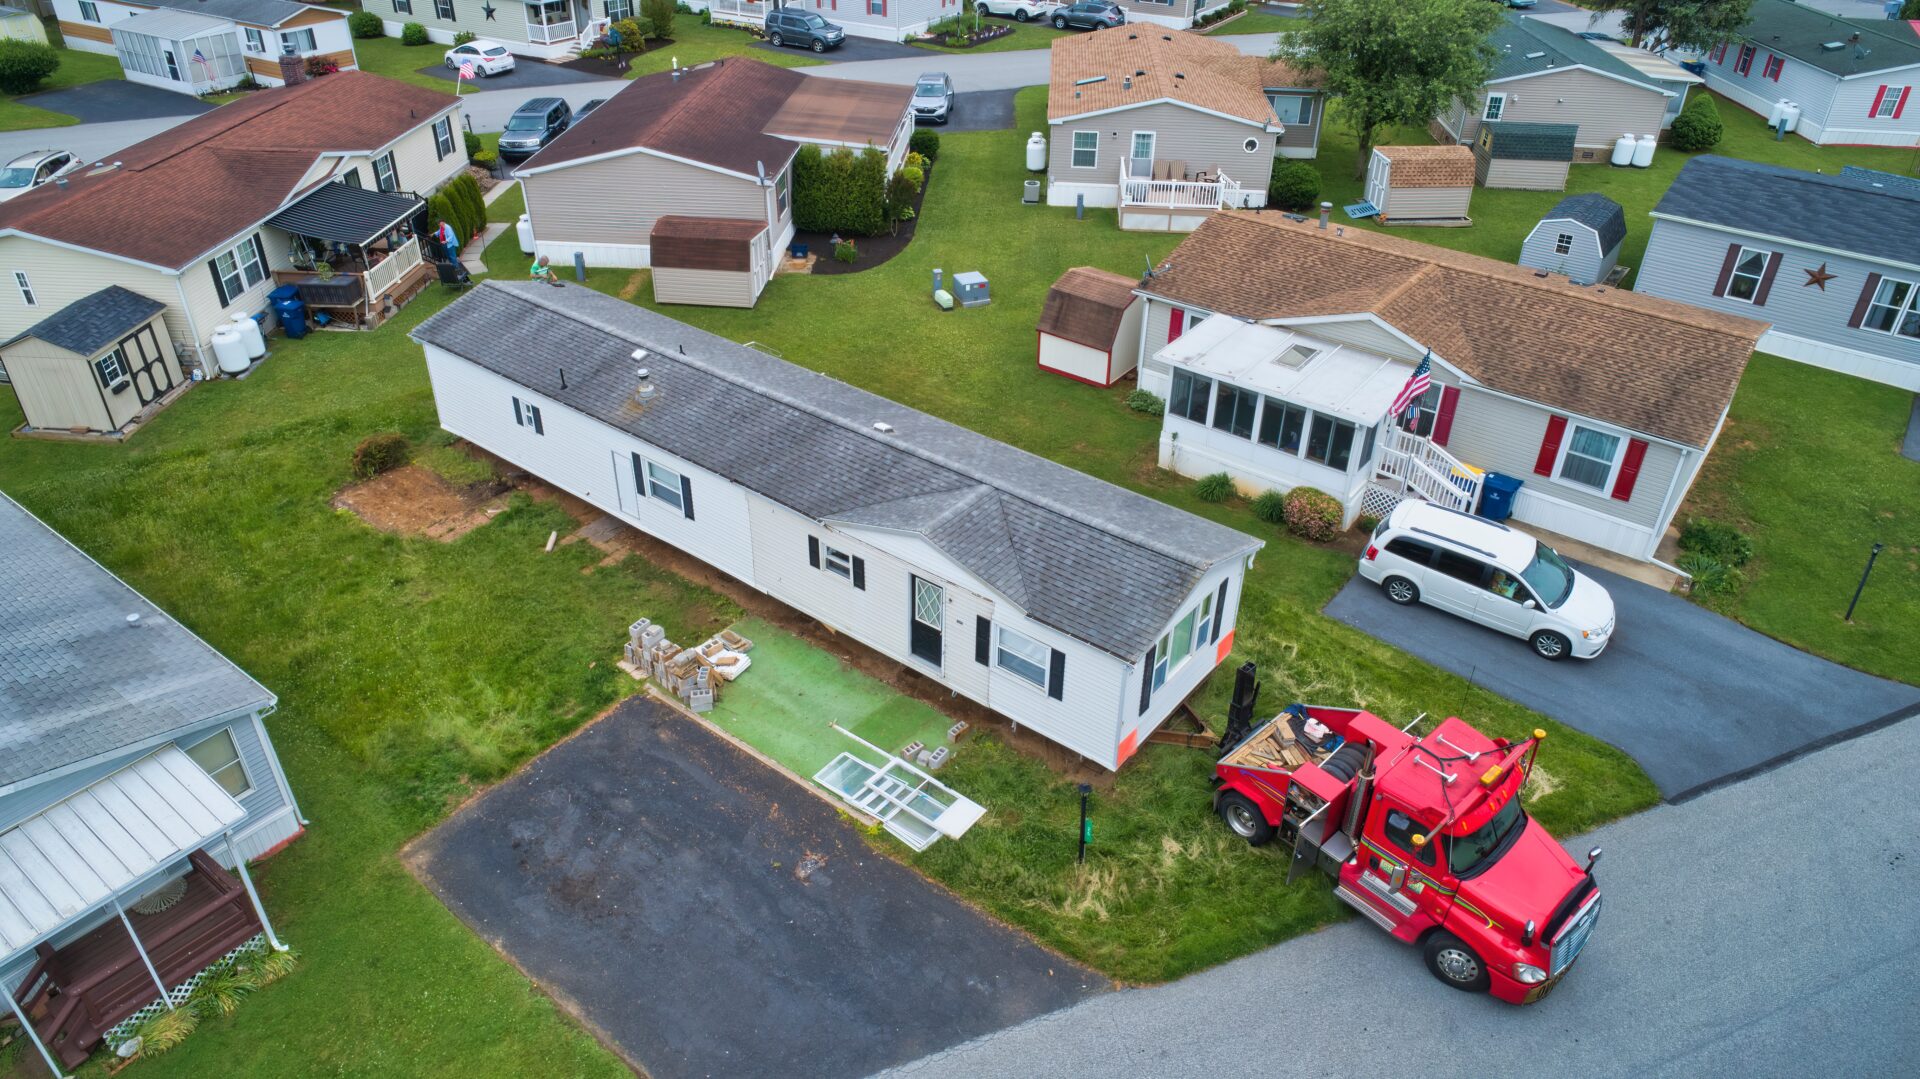 One of the most effective ways to improve your mobile home’s energy performance is by updating and upgrading the insulation.